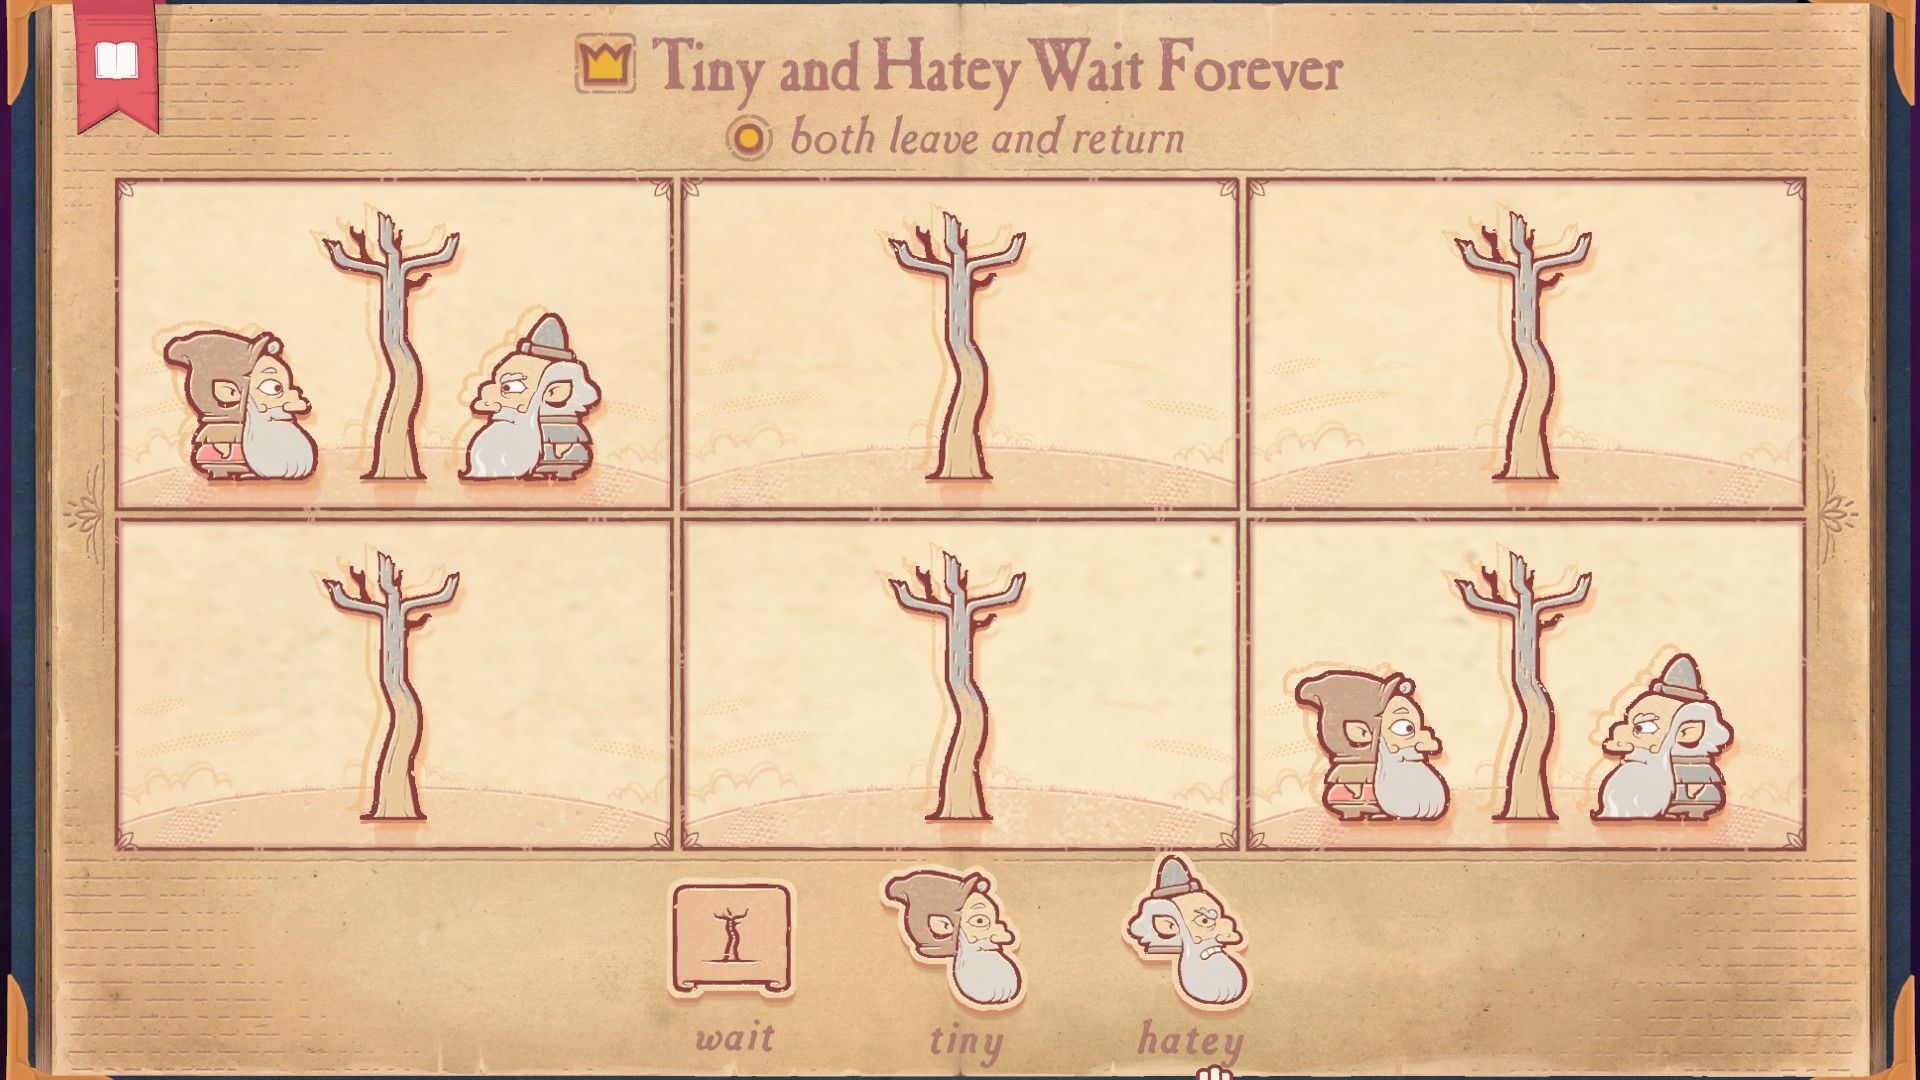 The solution for the Godot section of Storyteller, showing Tiny and Hatey waiting forever while both leaving and returning.